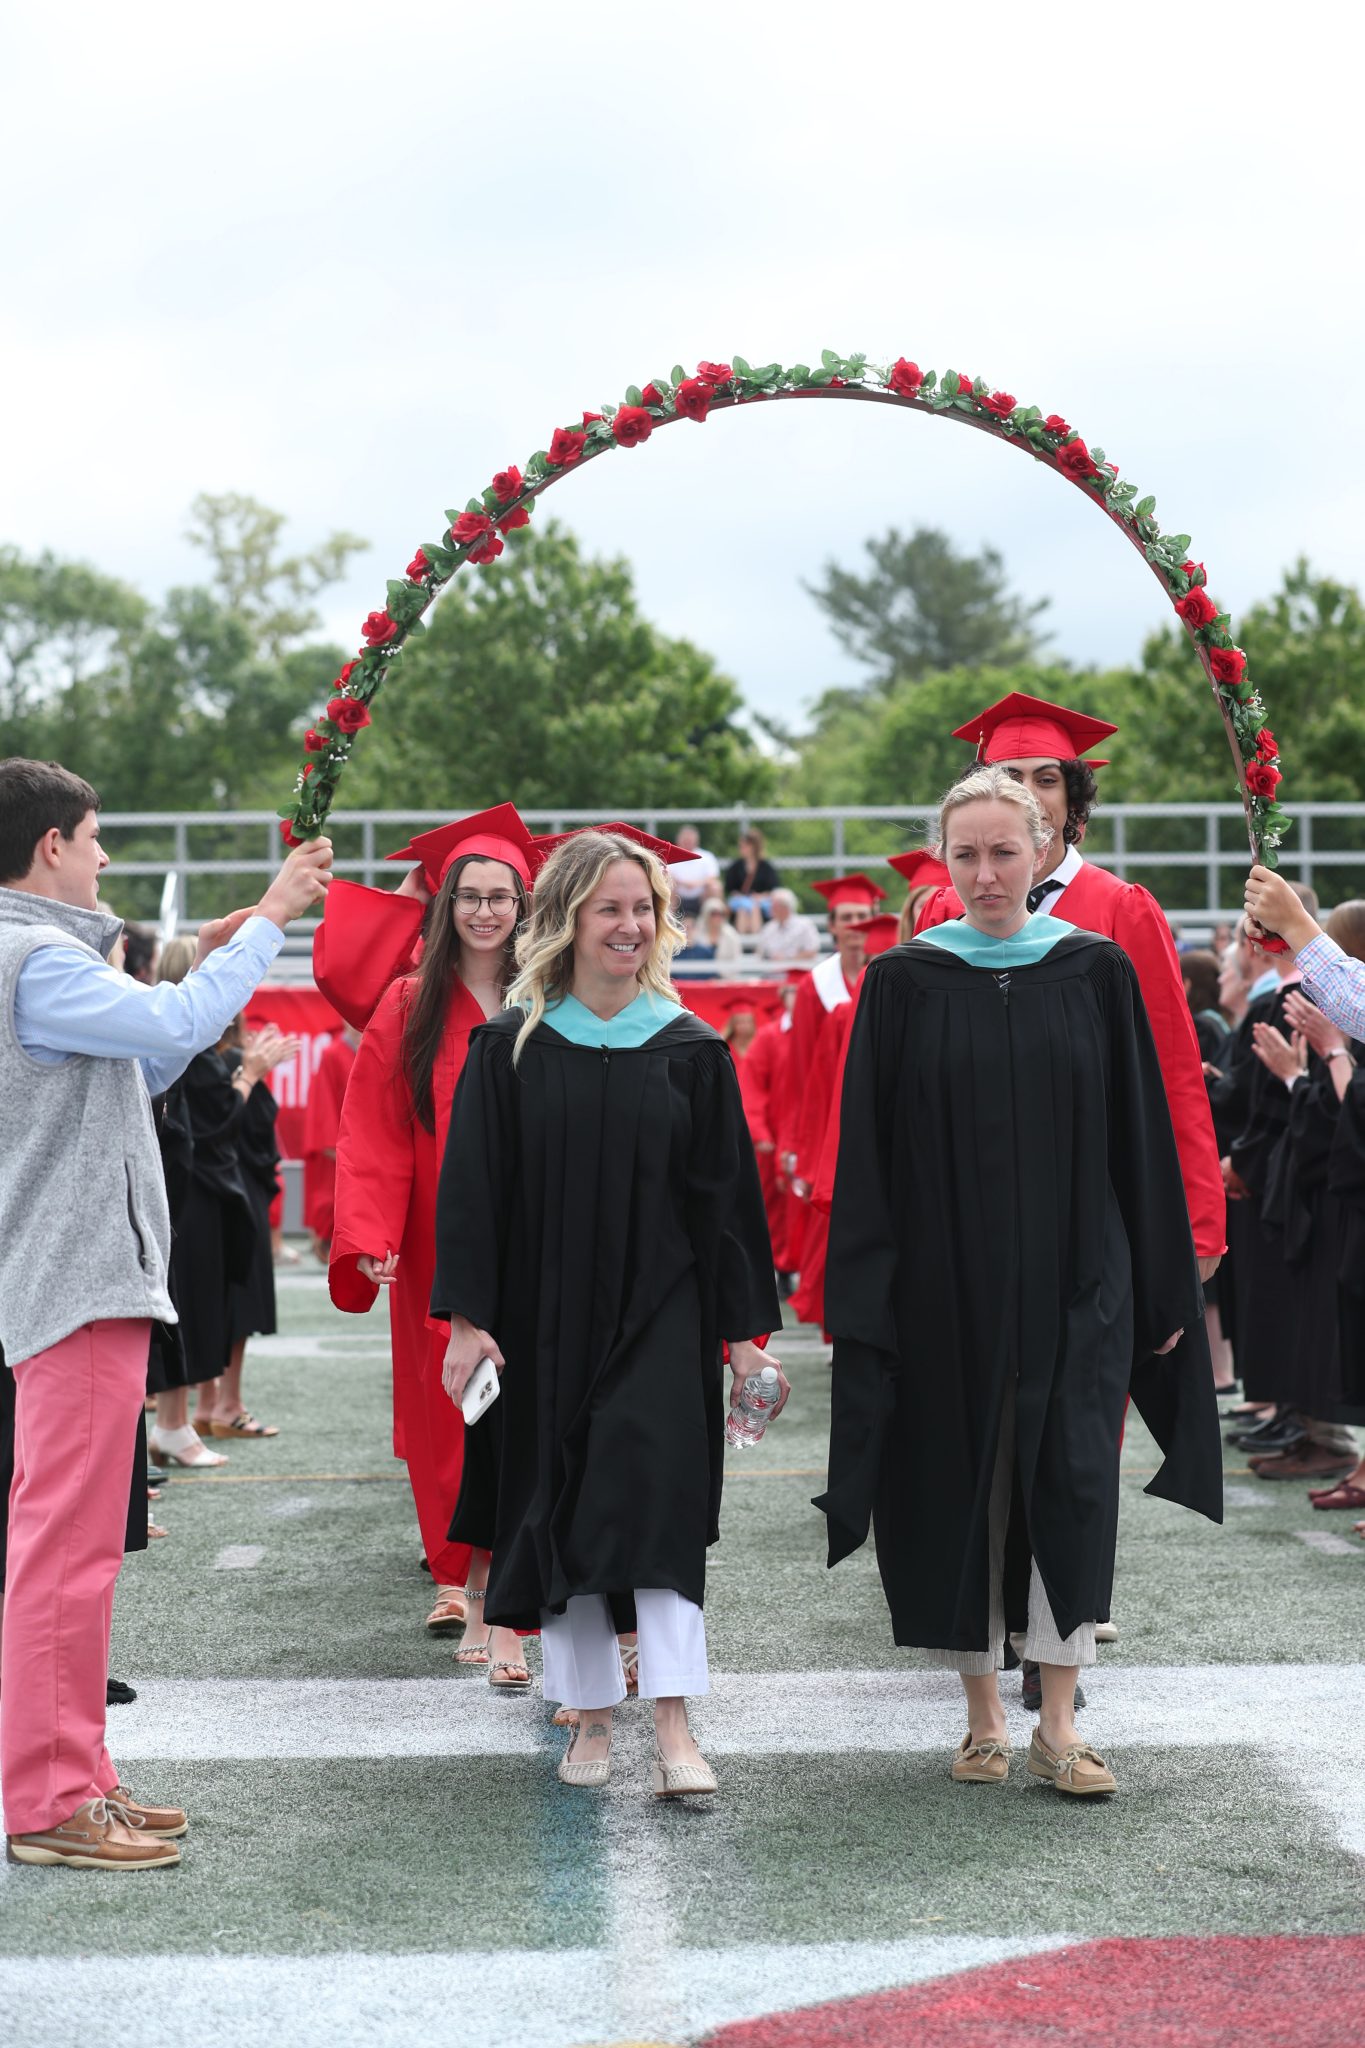 The procession was led by the Class of 2022 class advisors.